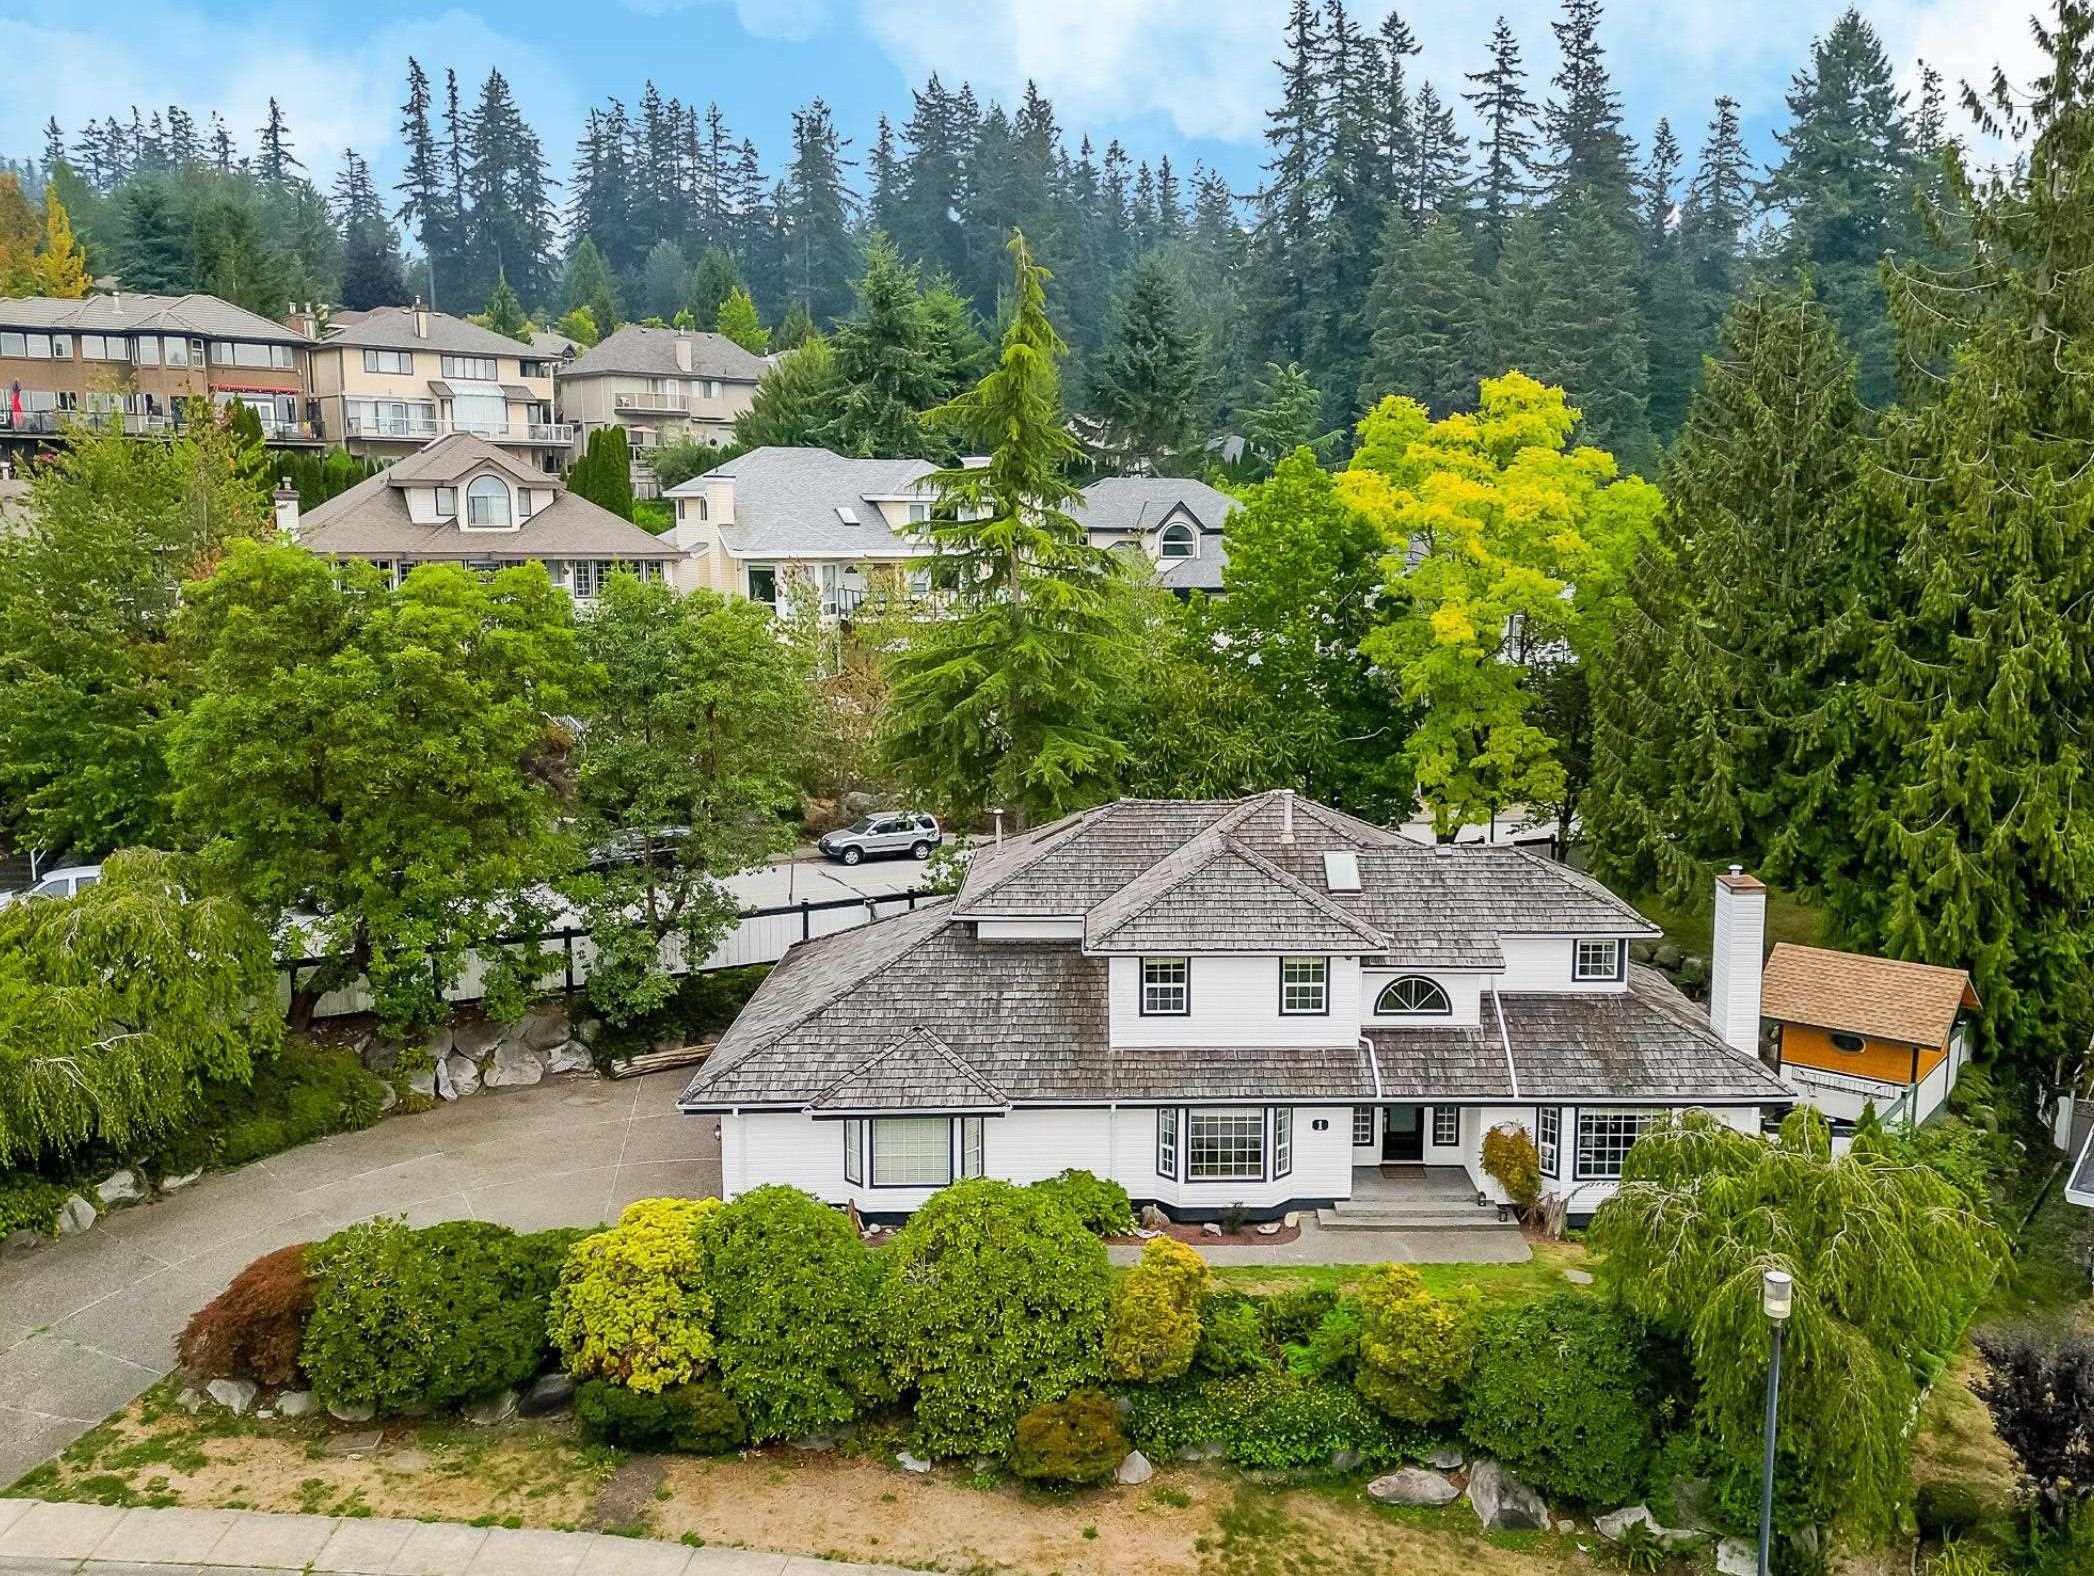 New property listed in Heritage Mountain, Port Moody